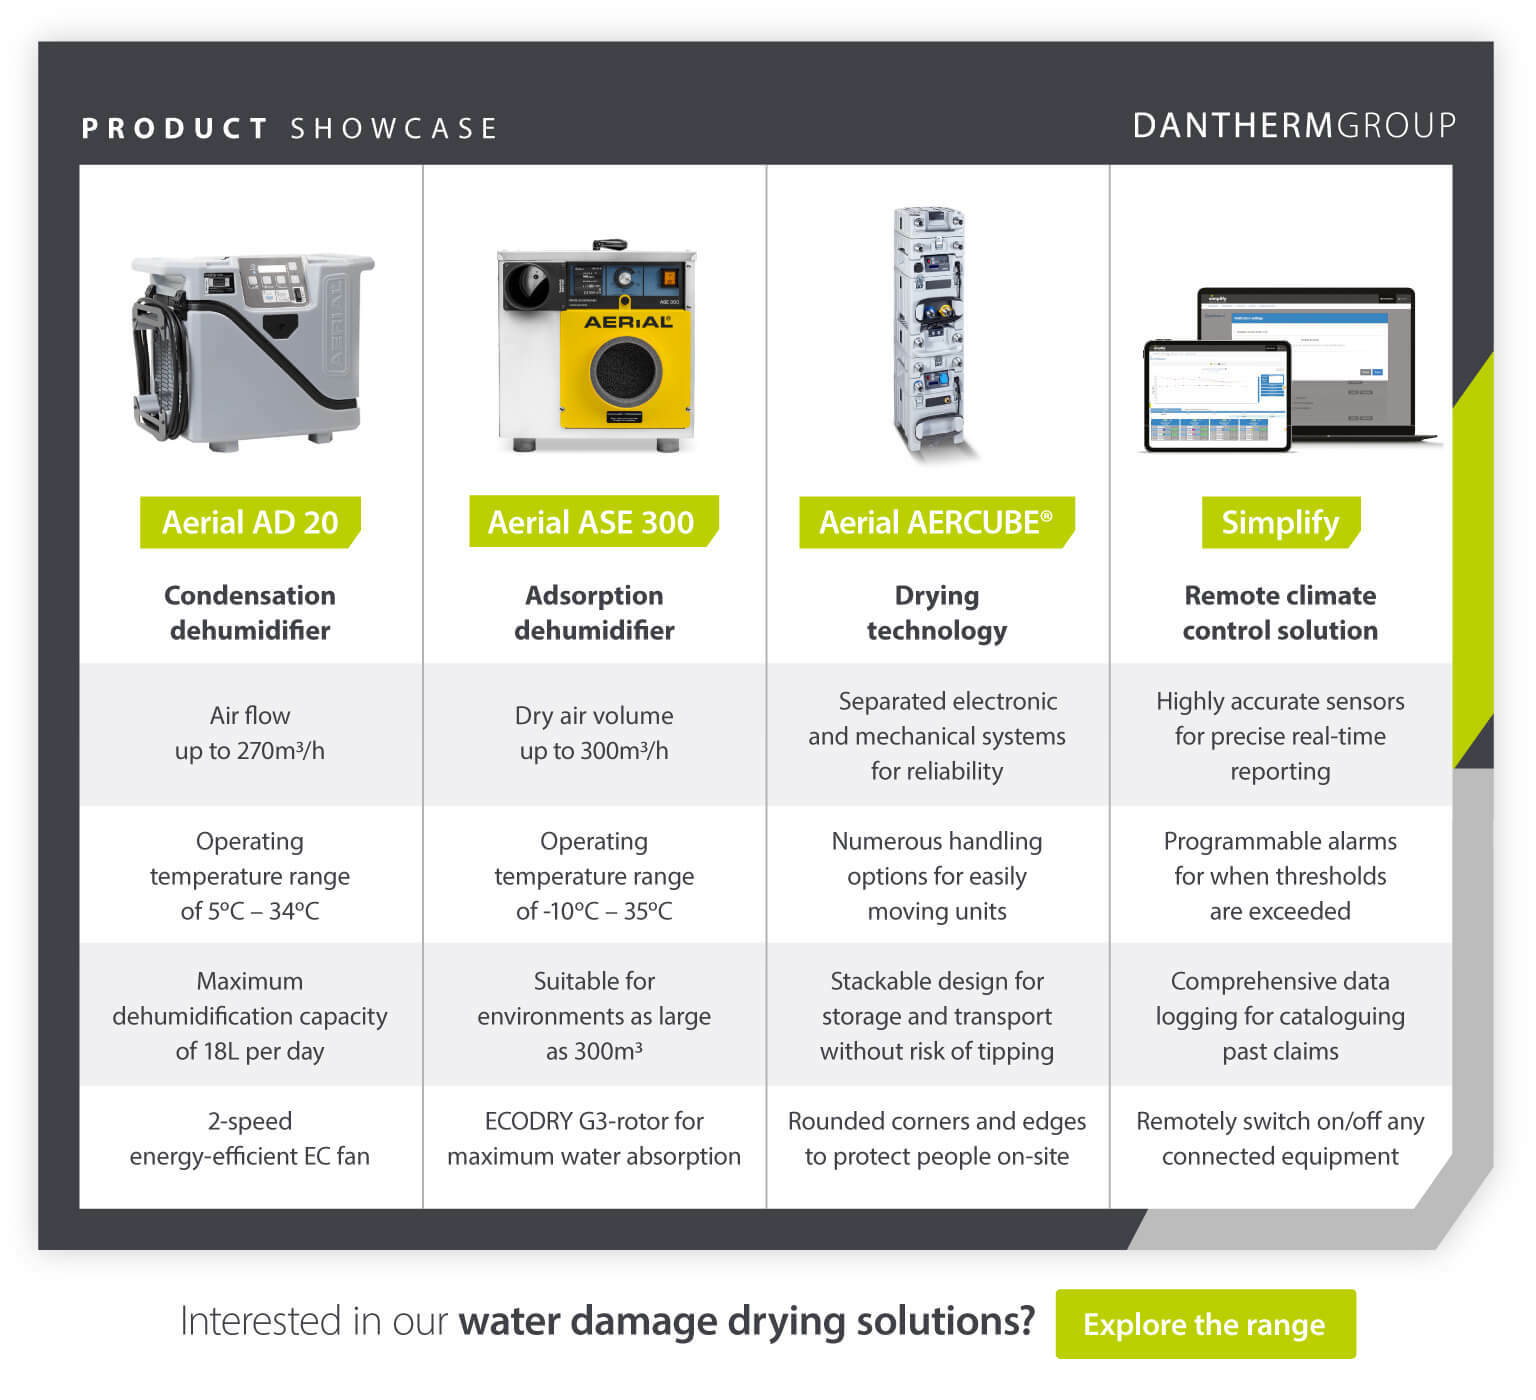 Product Showcase comparing 4 portable condensation dehumidifiers used for water damage drying